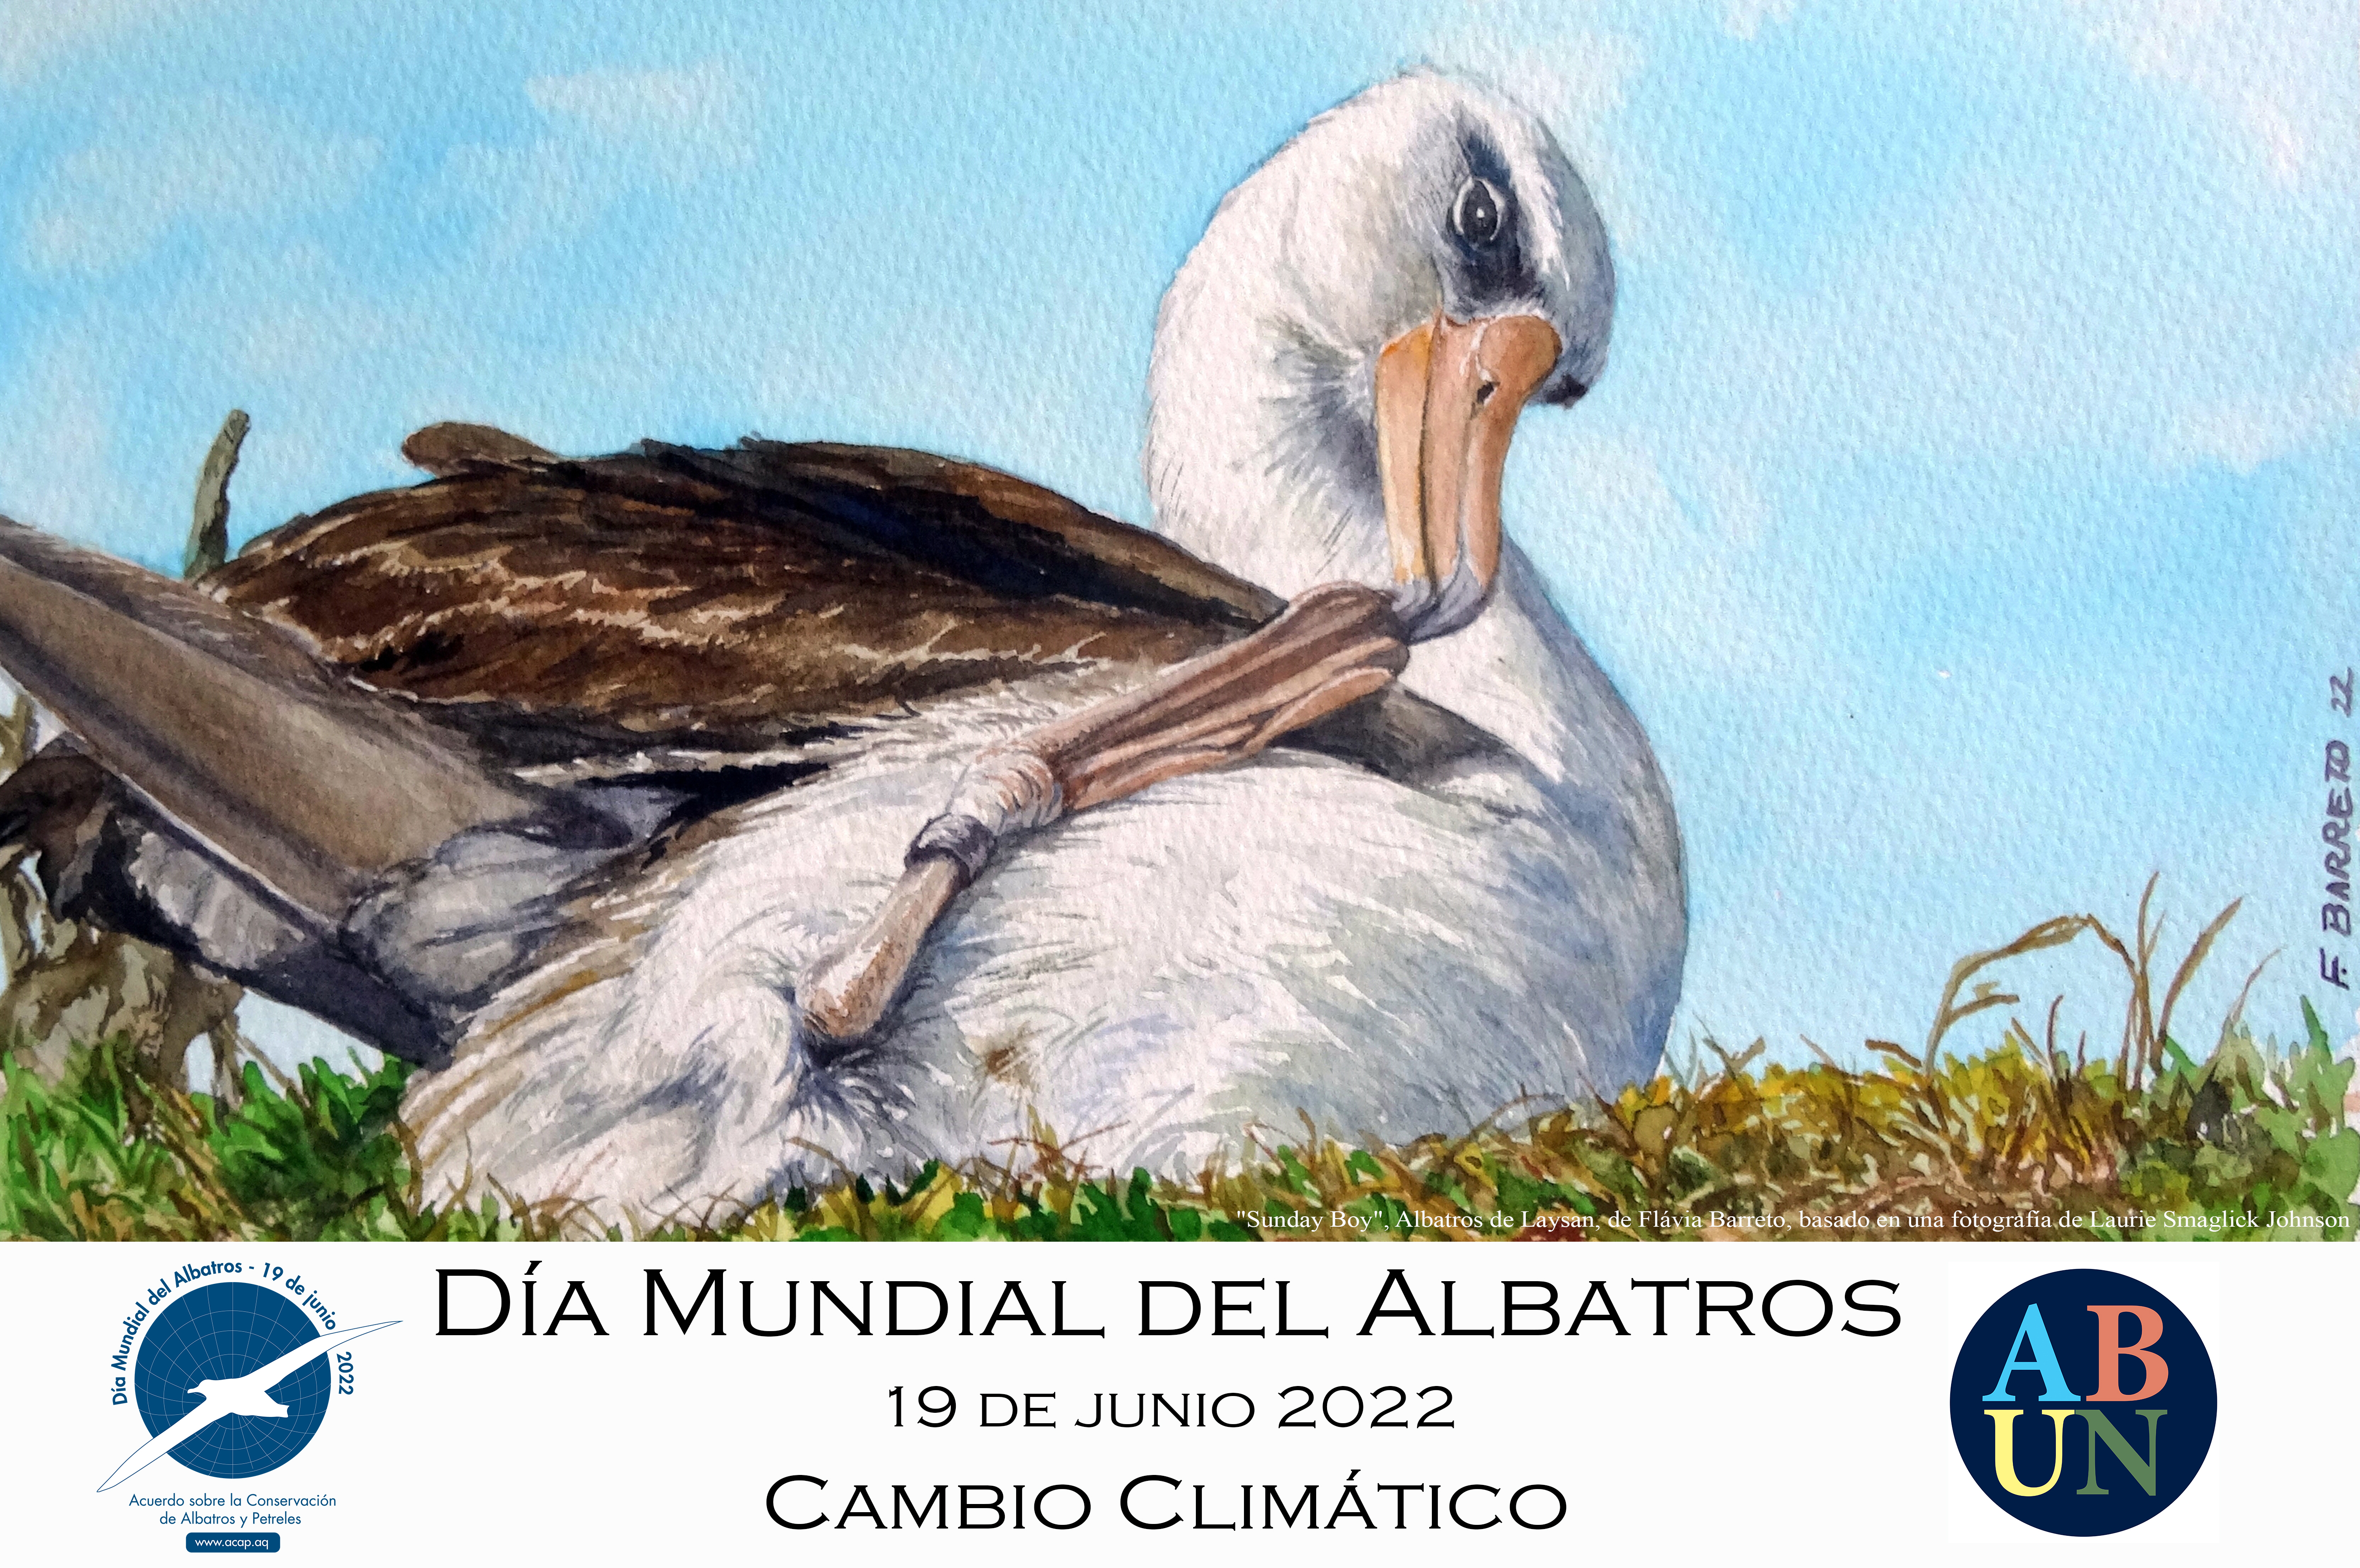 Sp Sunday Boy Laysan Albatross by Flávia Barreto after a photograph by Laurie Smaglick Johnson Spanish